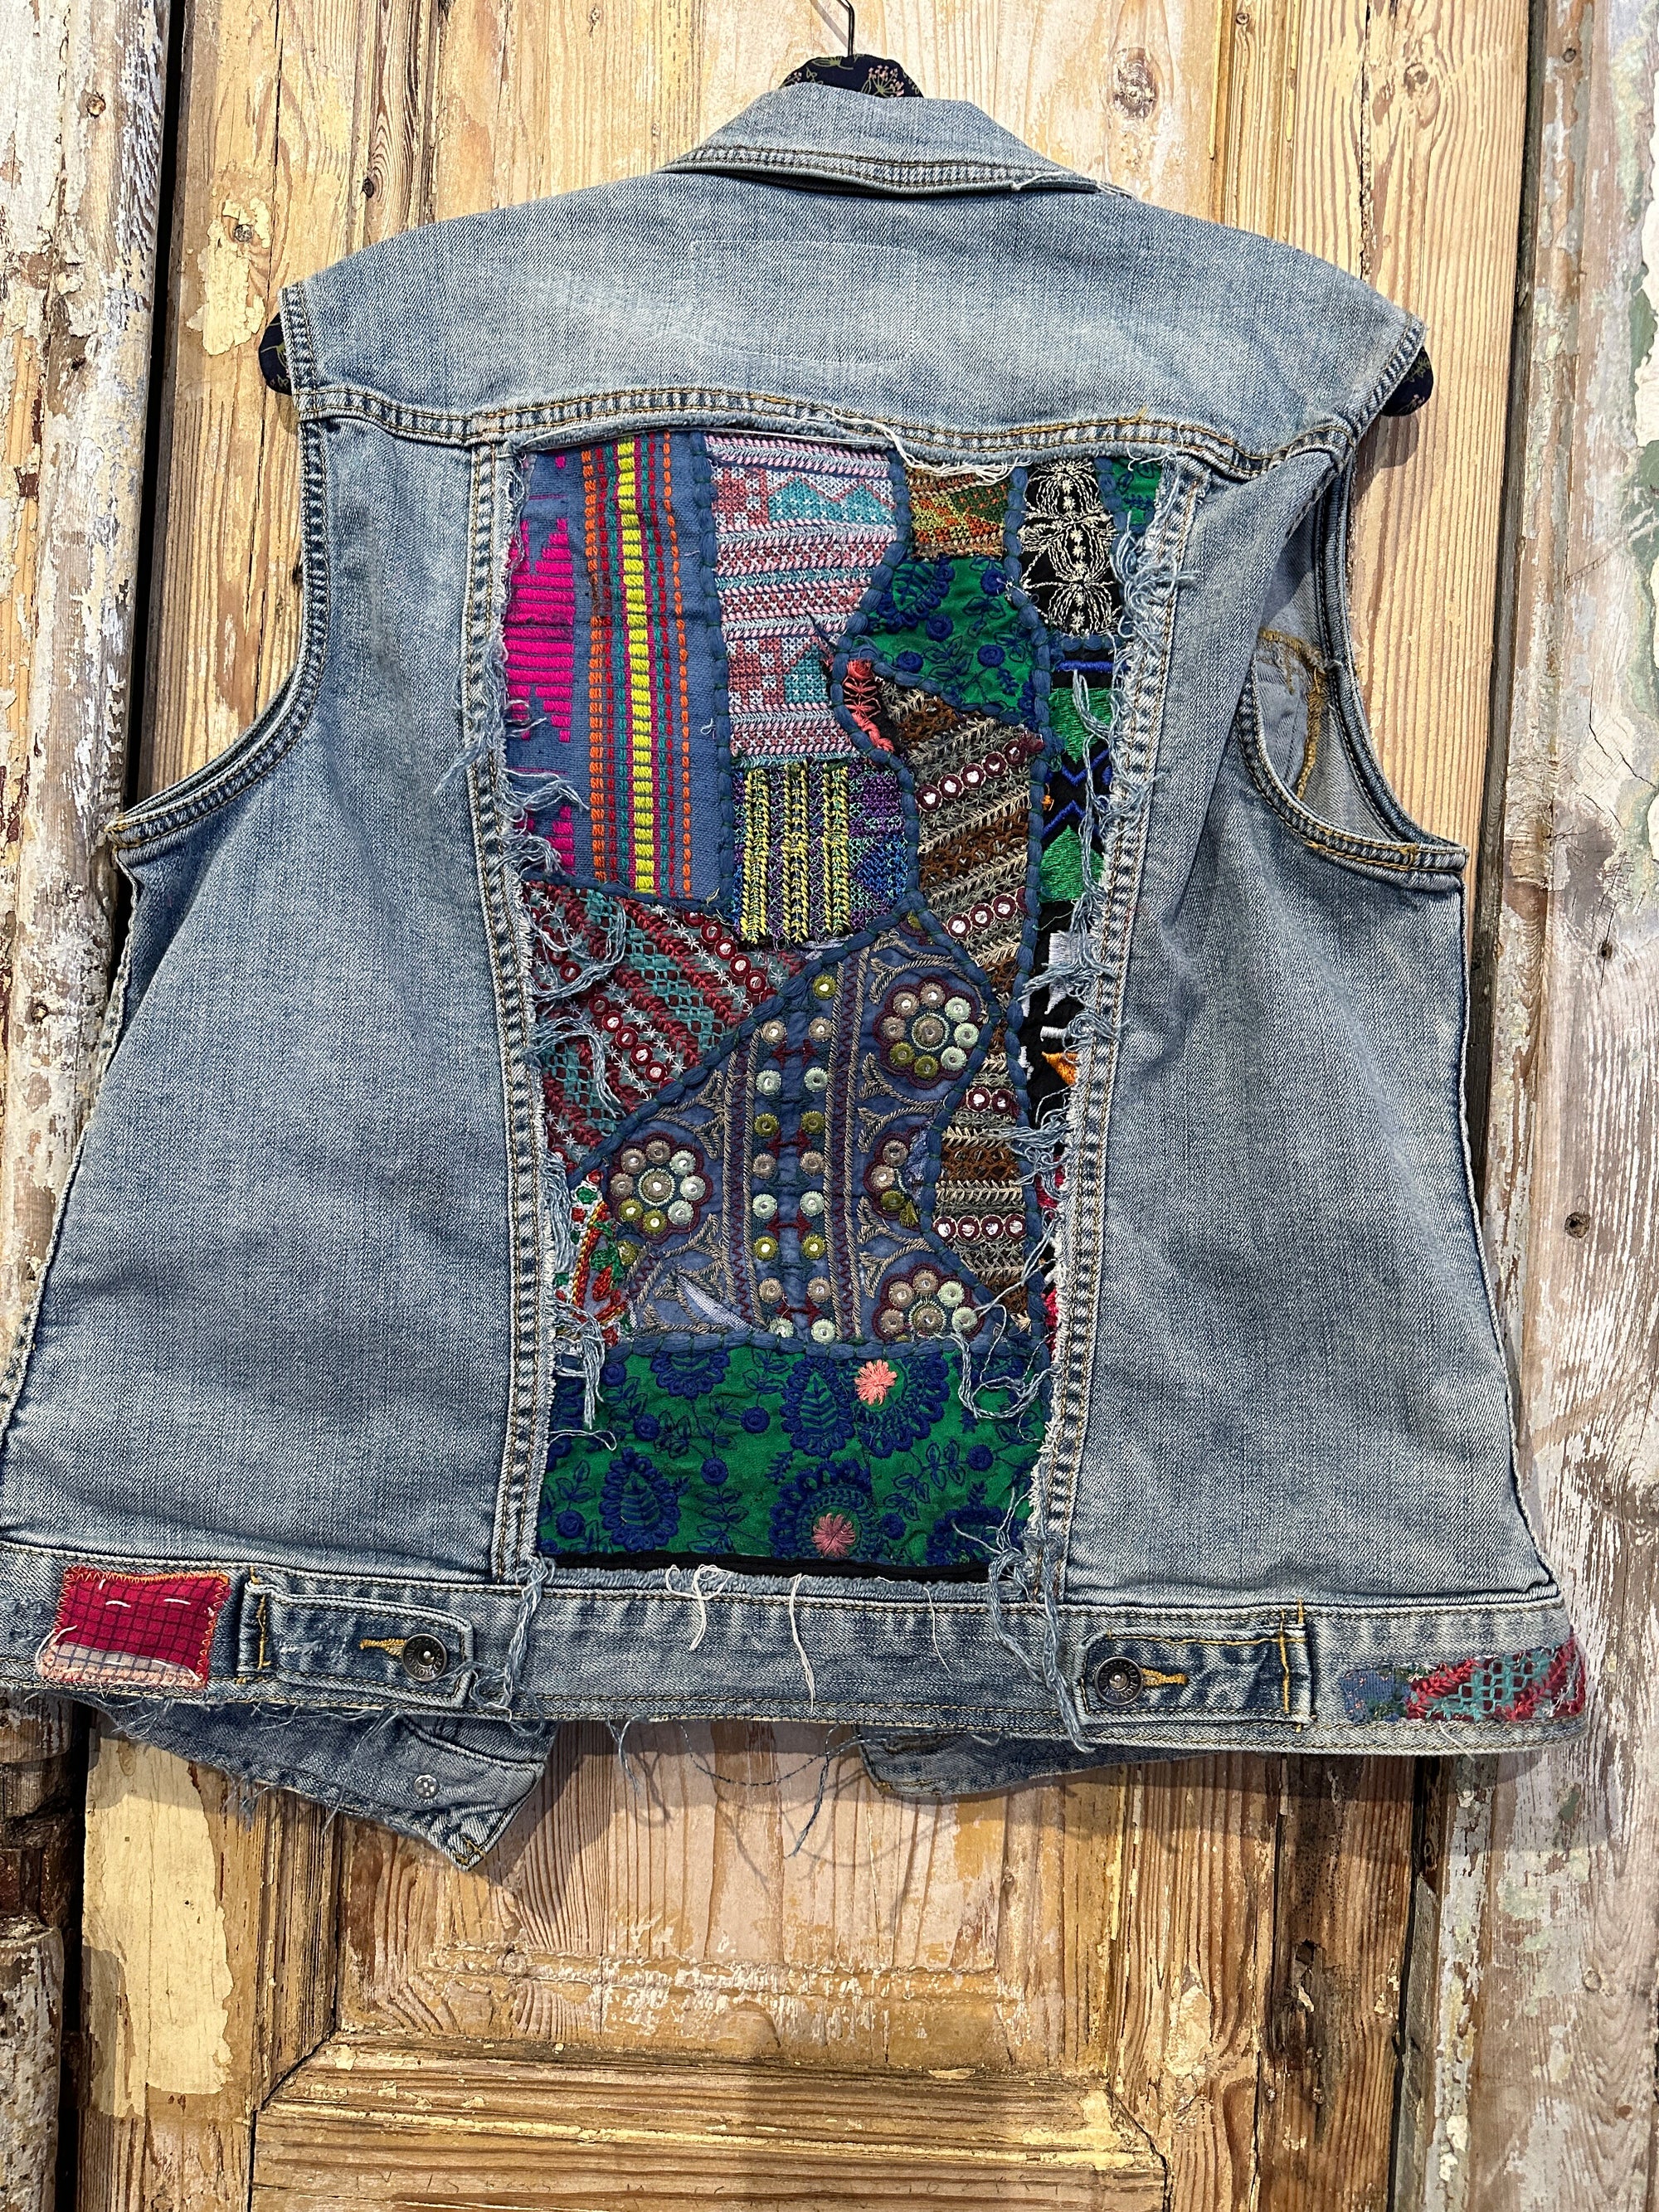 Up Cycled Carpet Vest